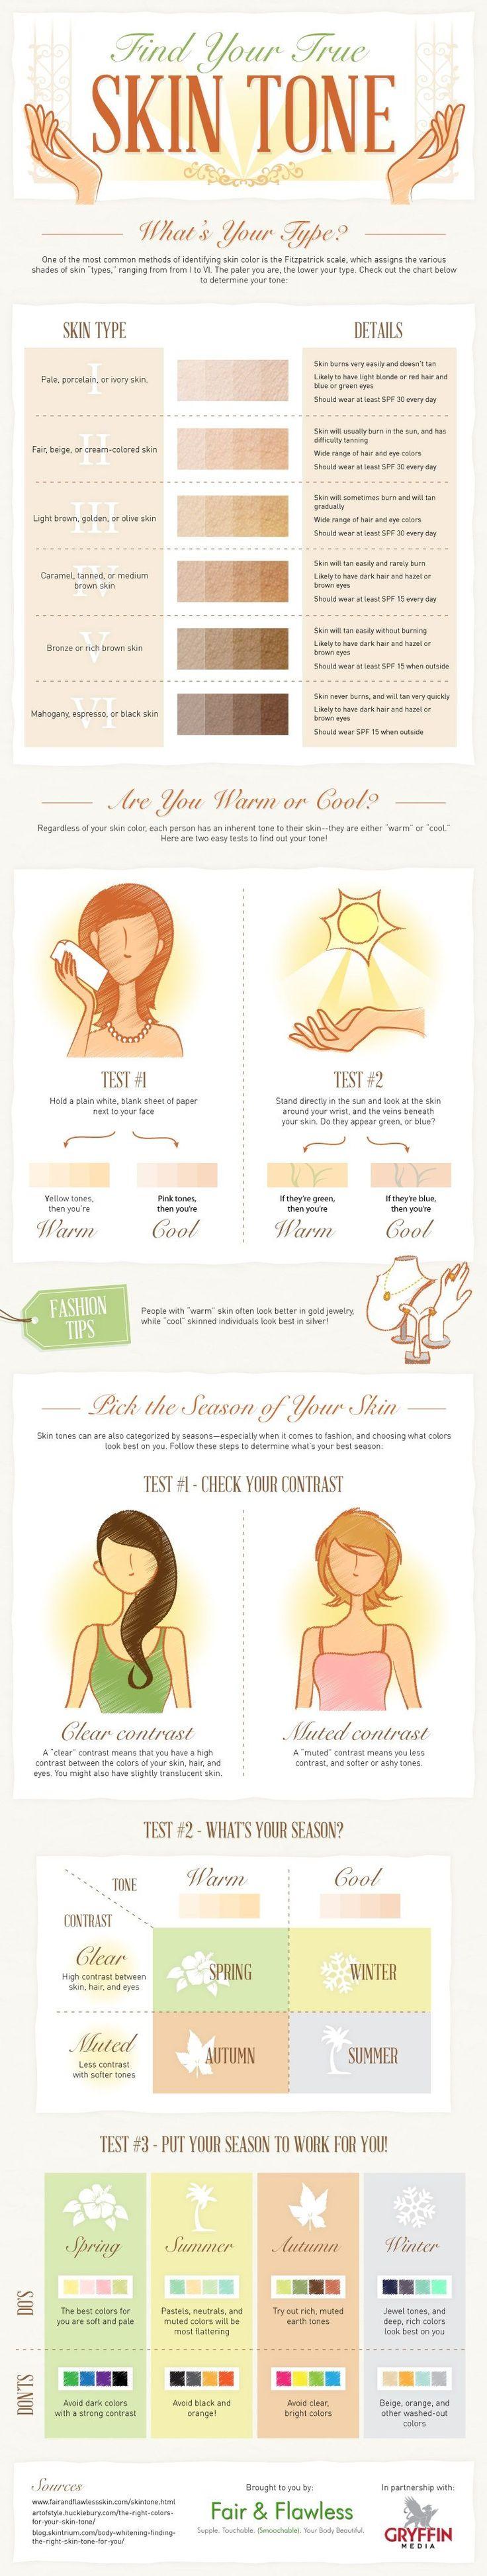 Wedding - How To Determine Your Skin Tone Once And For All